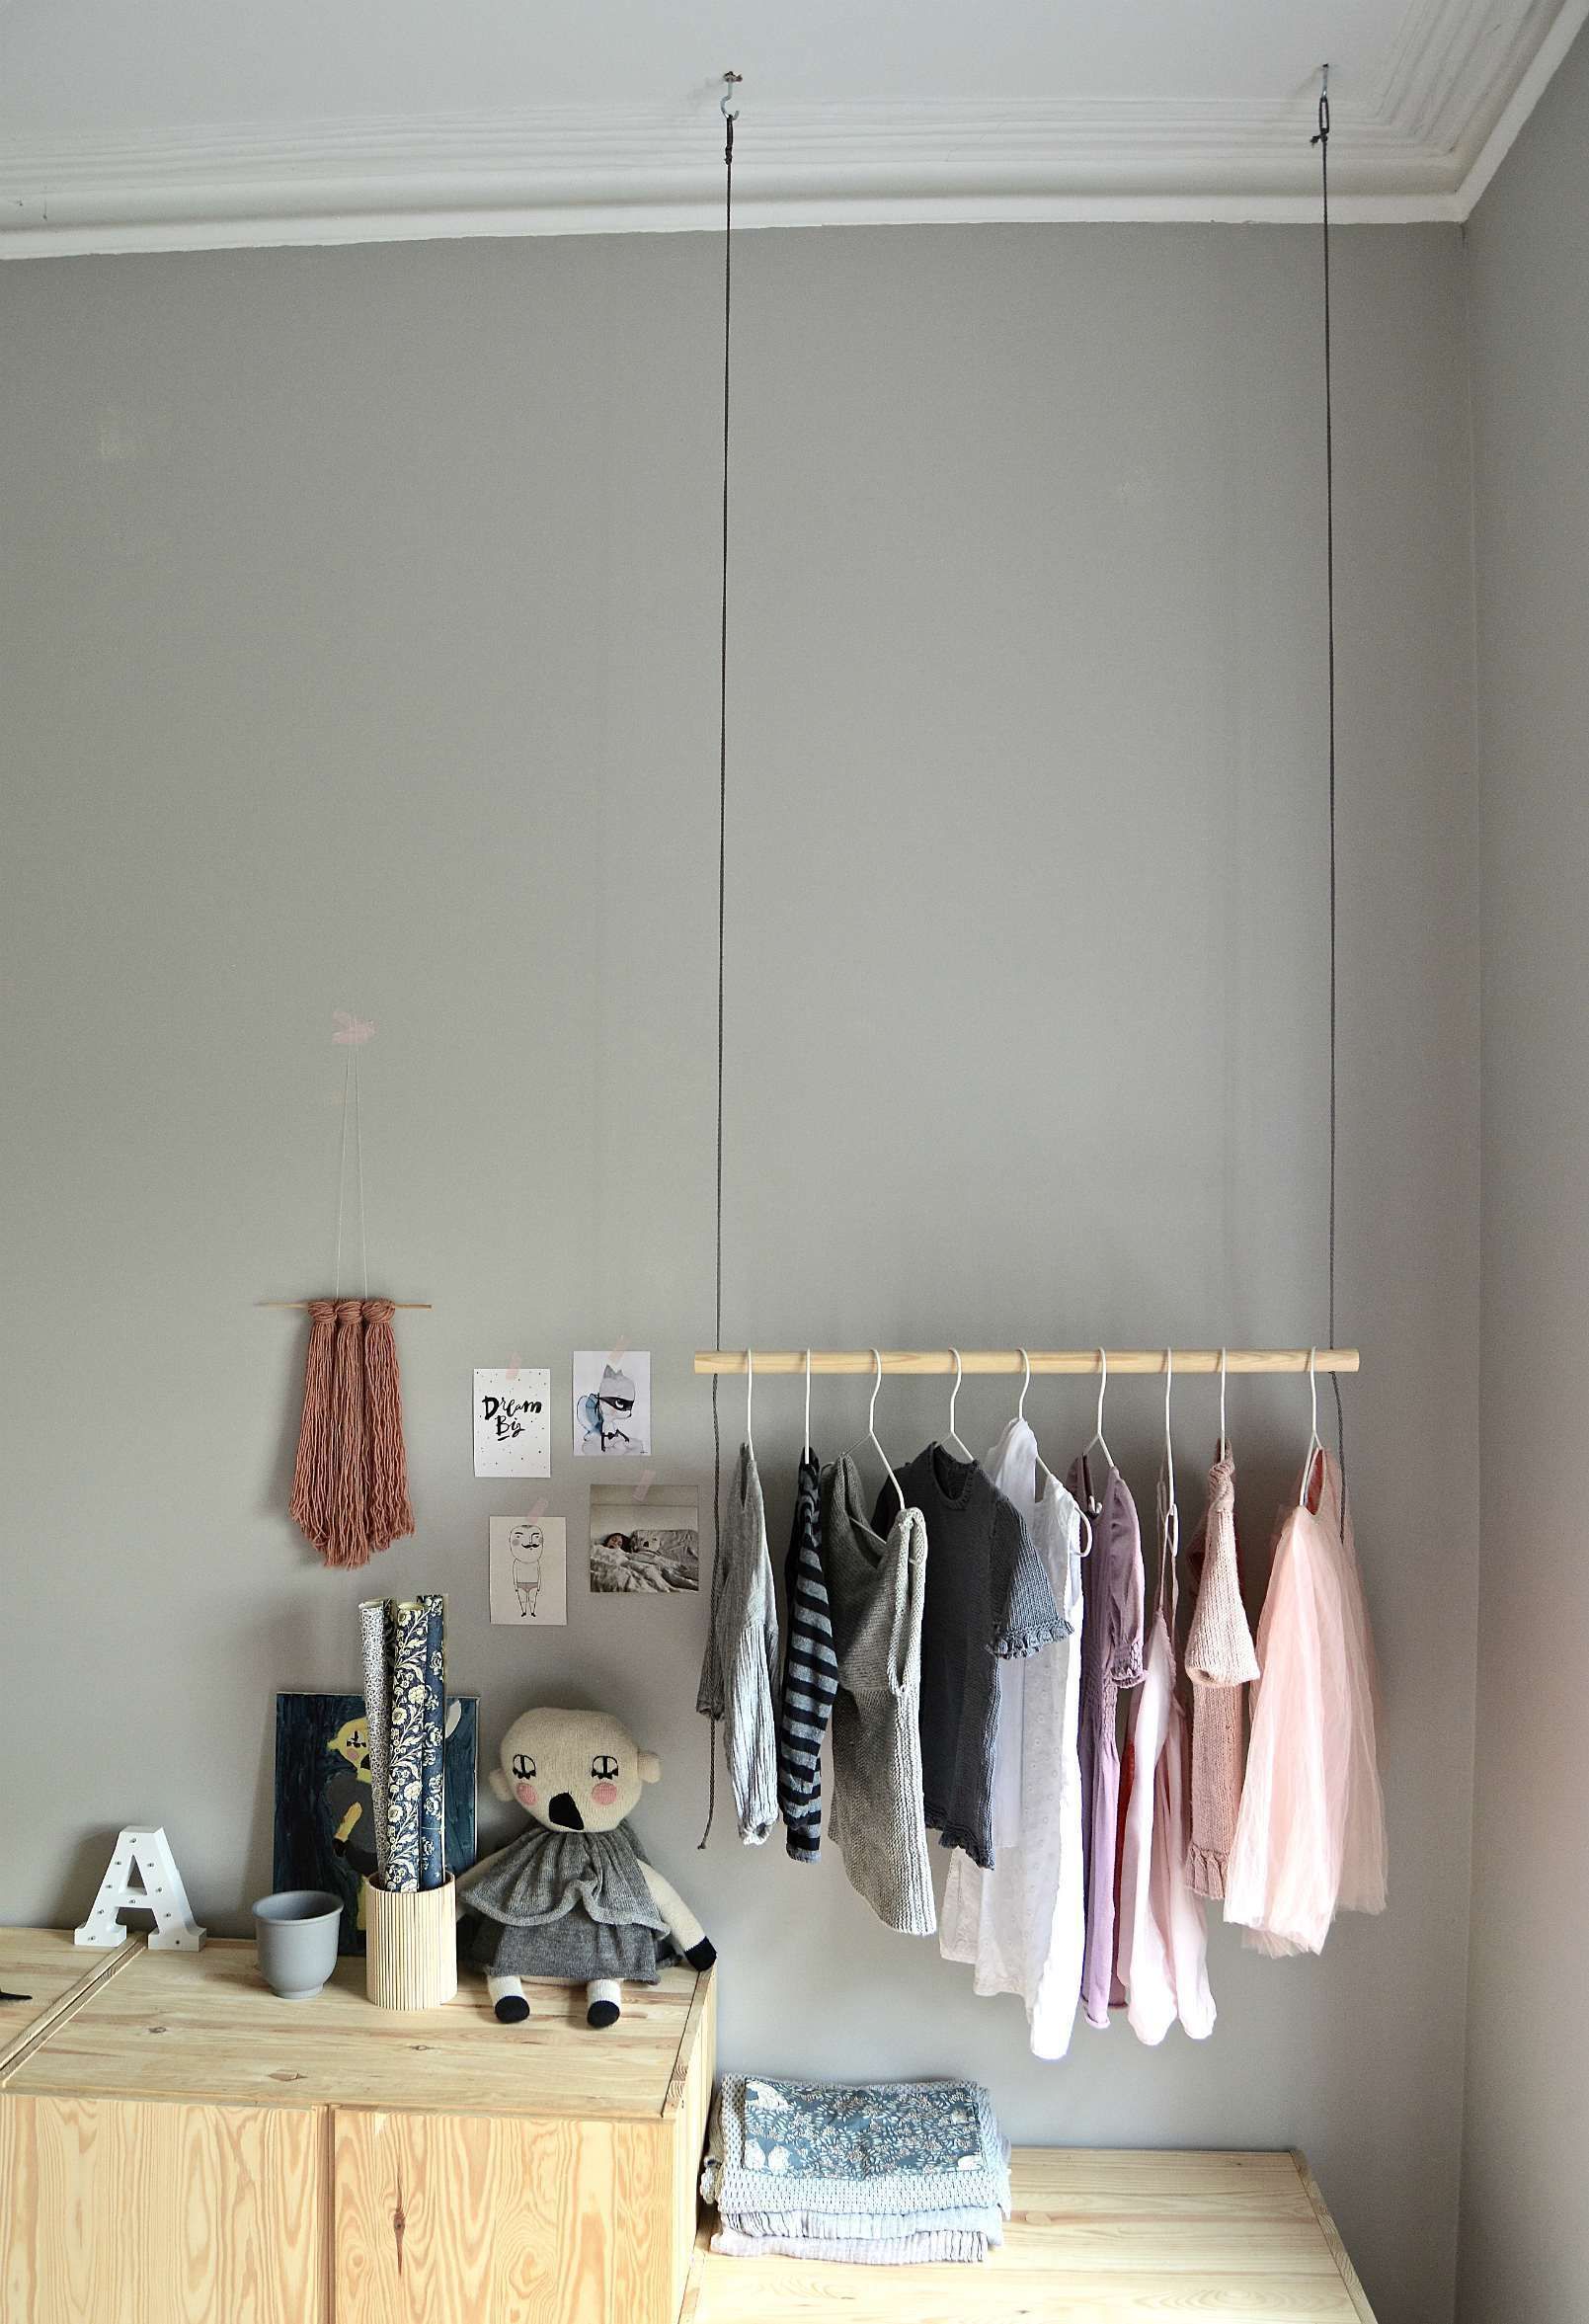 Hang on! With this DIY hanging clothes rack -   20 DIY Clothes Decoration inspiration
 ideas